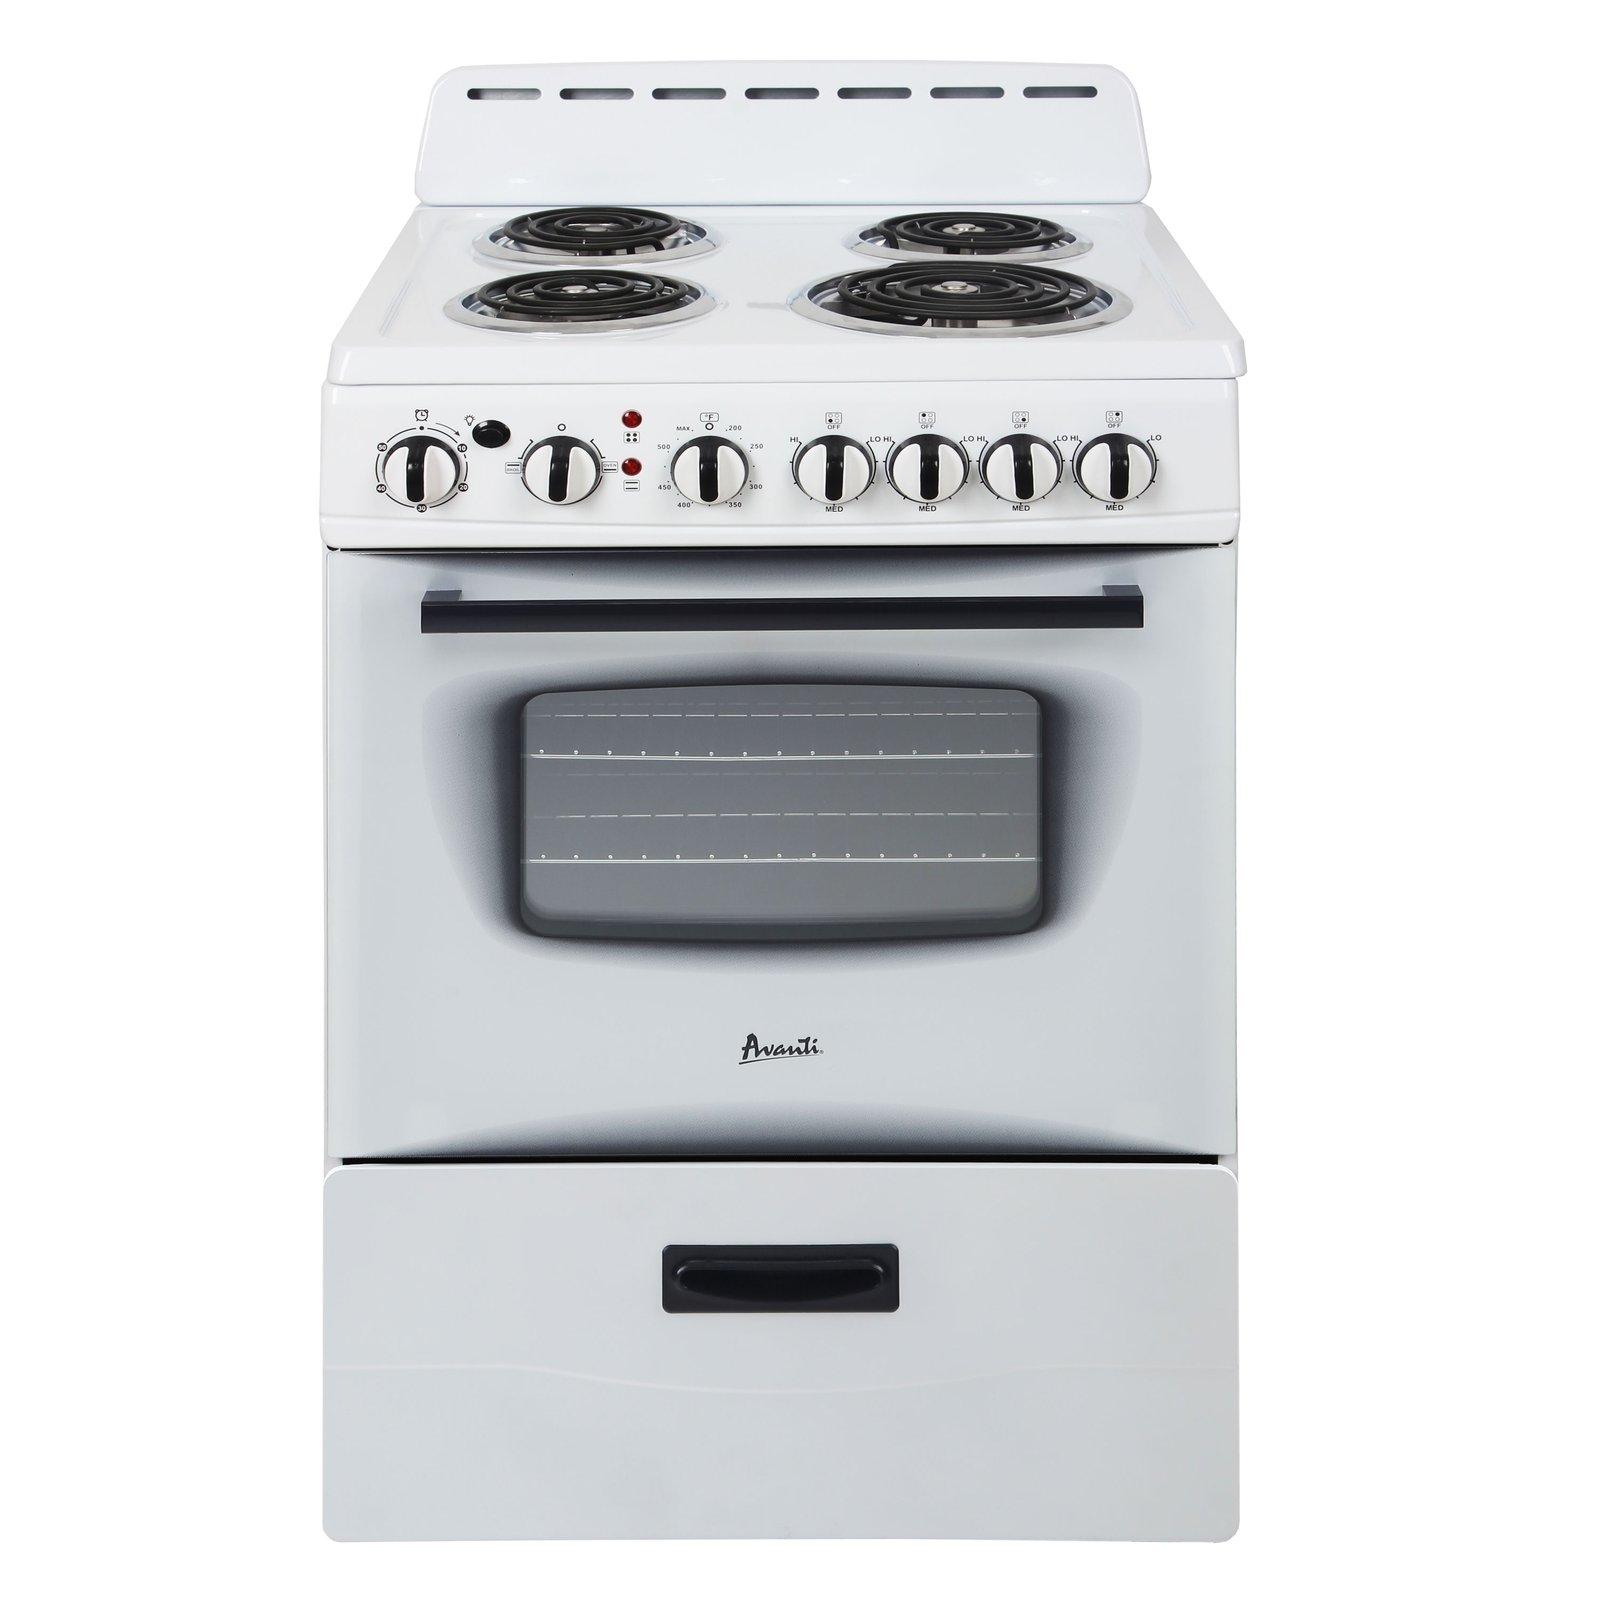 Avanti 24" Electric Range Oven with Framed Glass Door - White / 2.6 cu. ft.